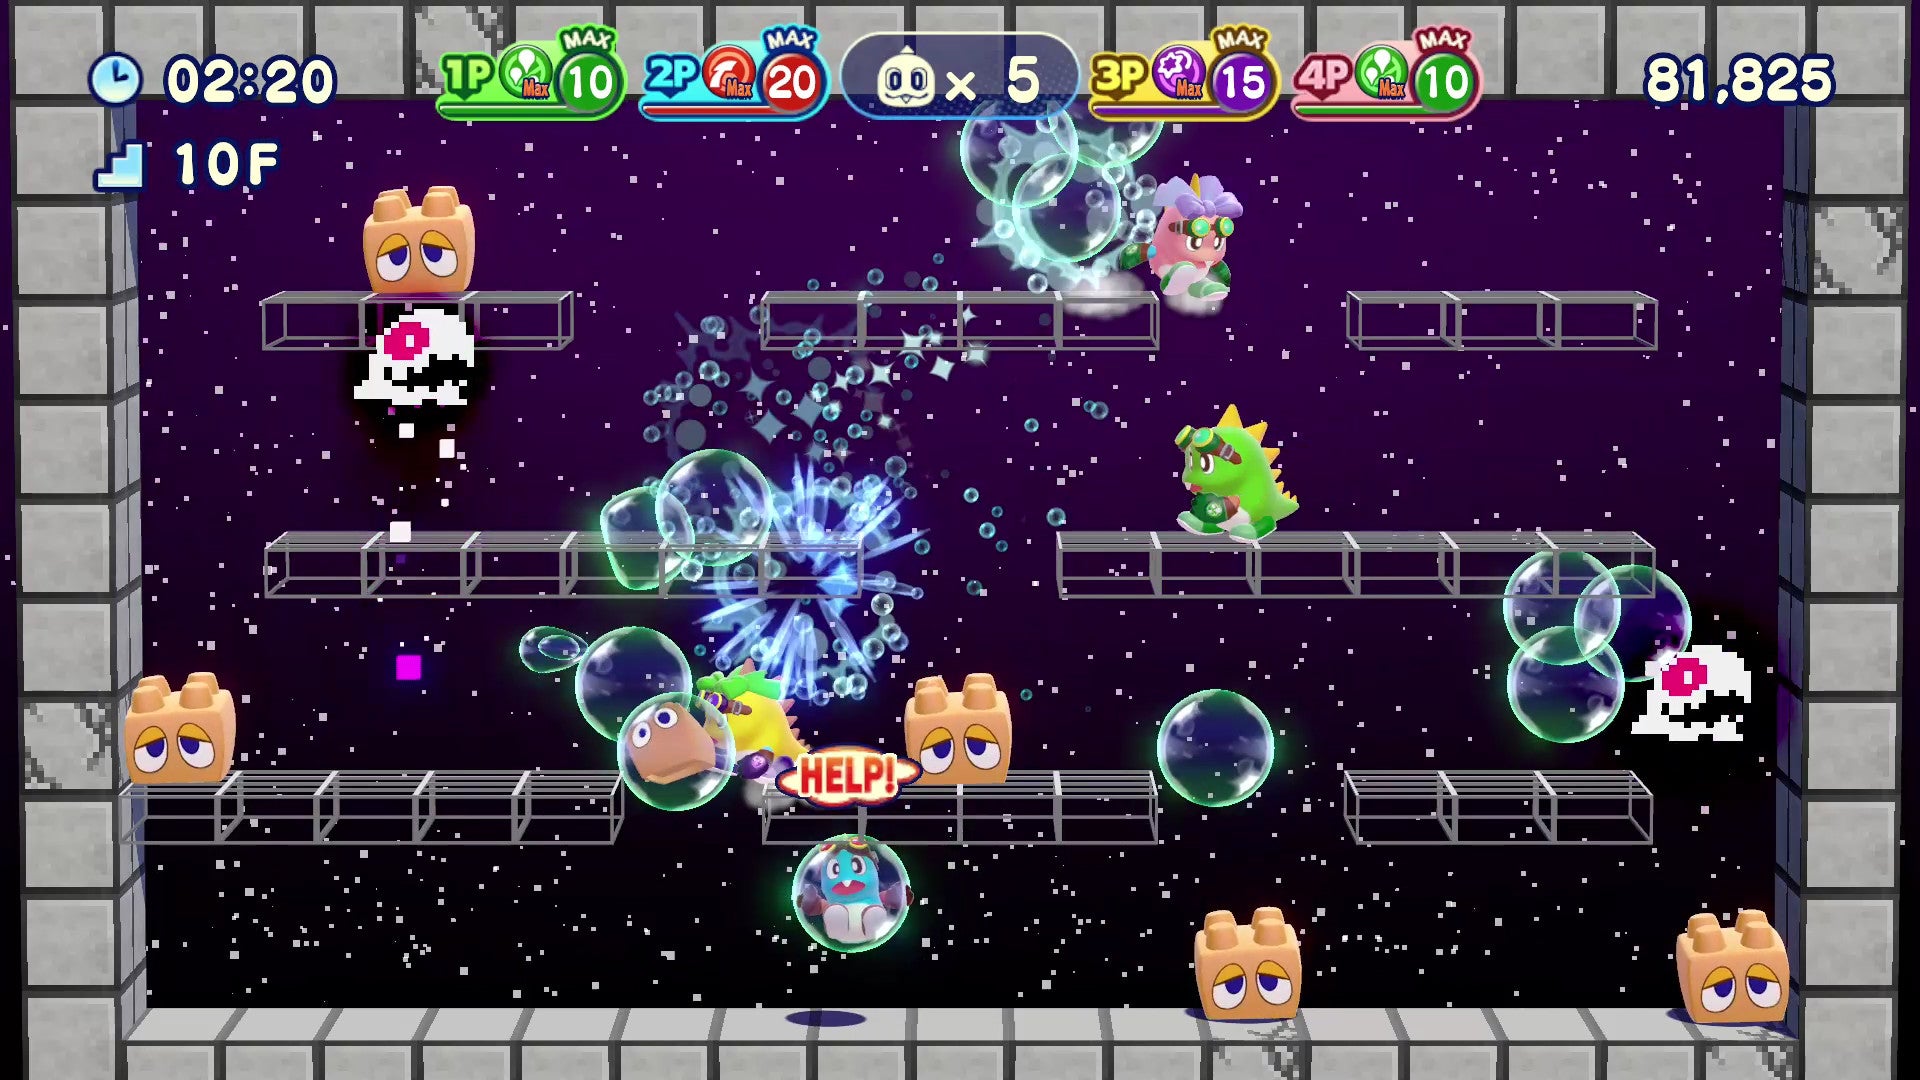 A screenshot of Bubble Bobble 4 Friends showing a stage of platforms with Bub and Bob fighting various bullies with bubbles.